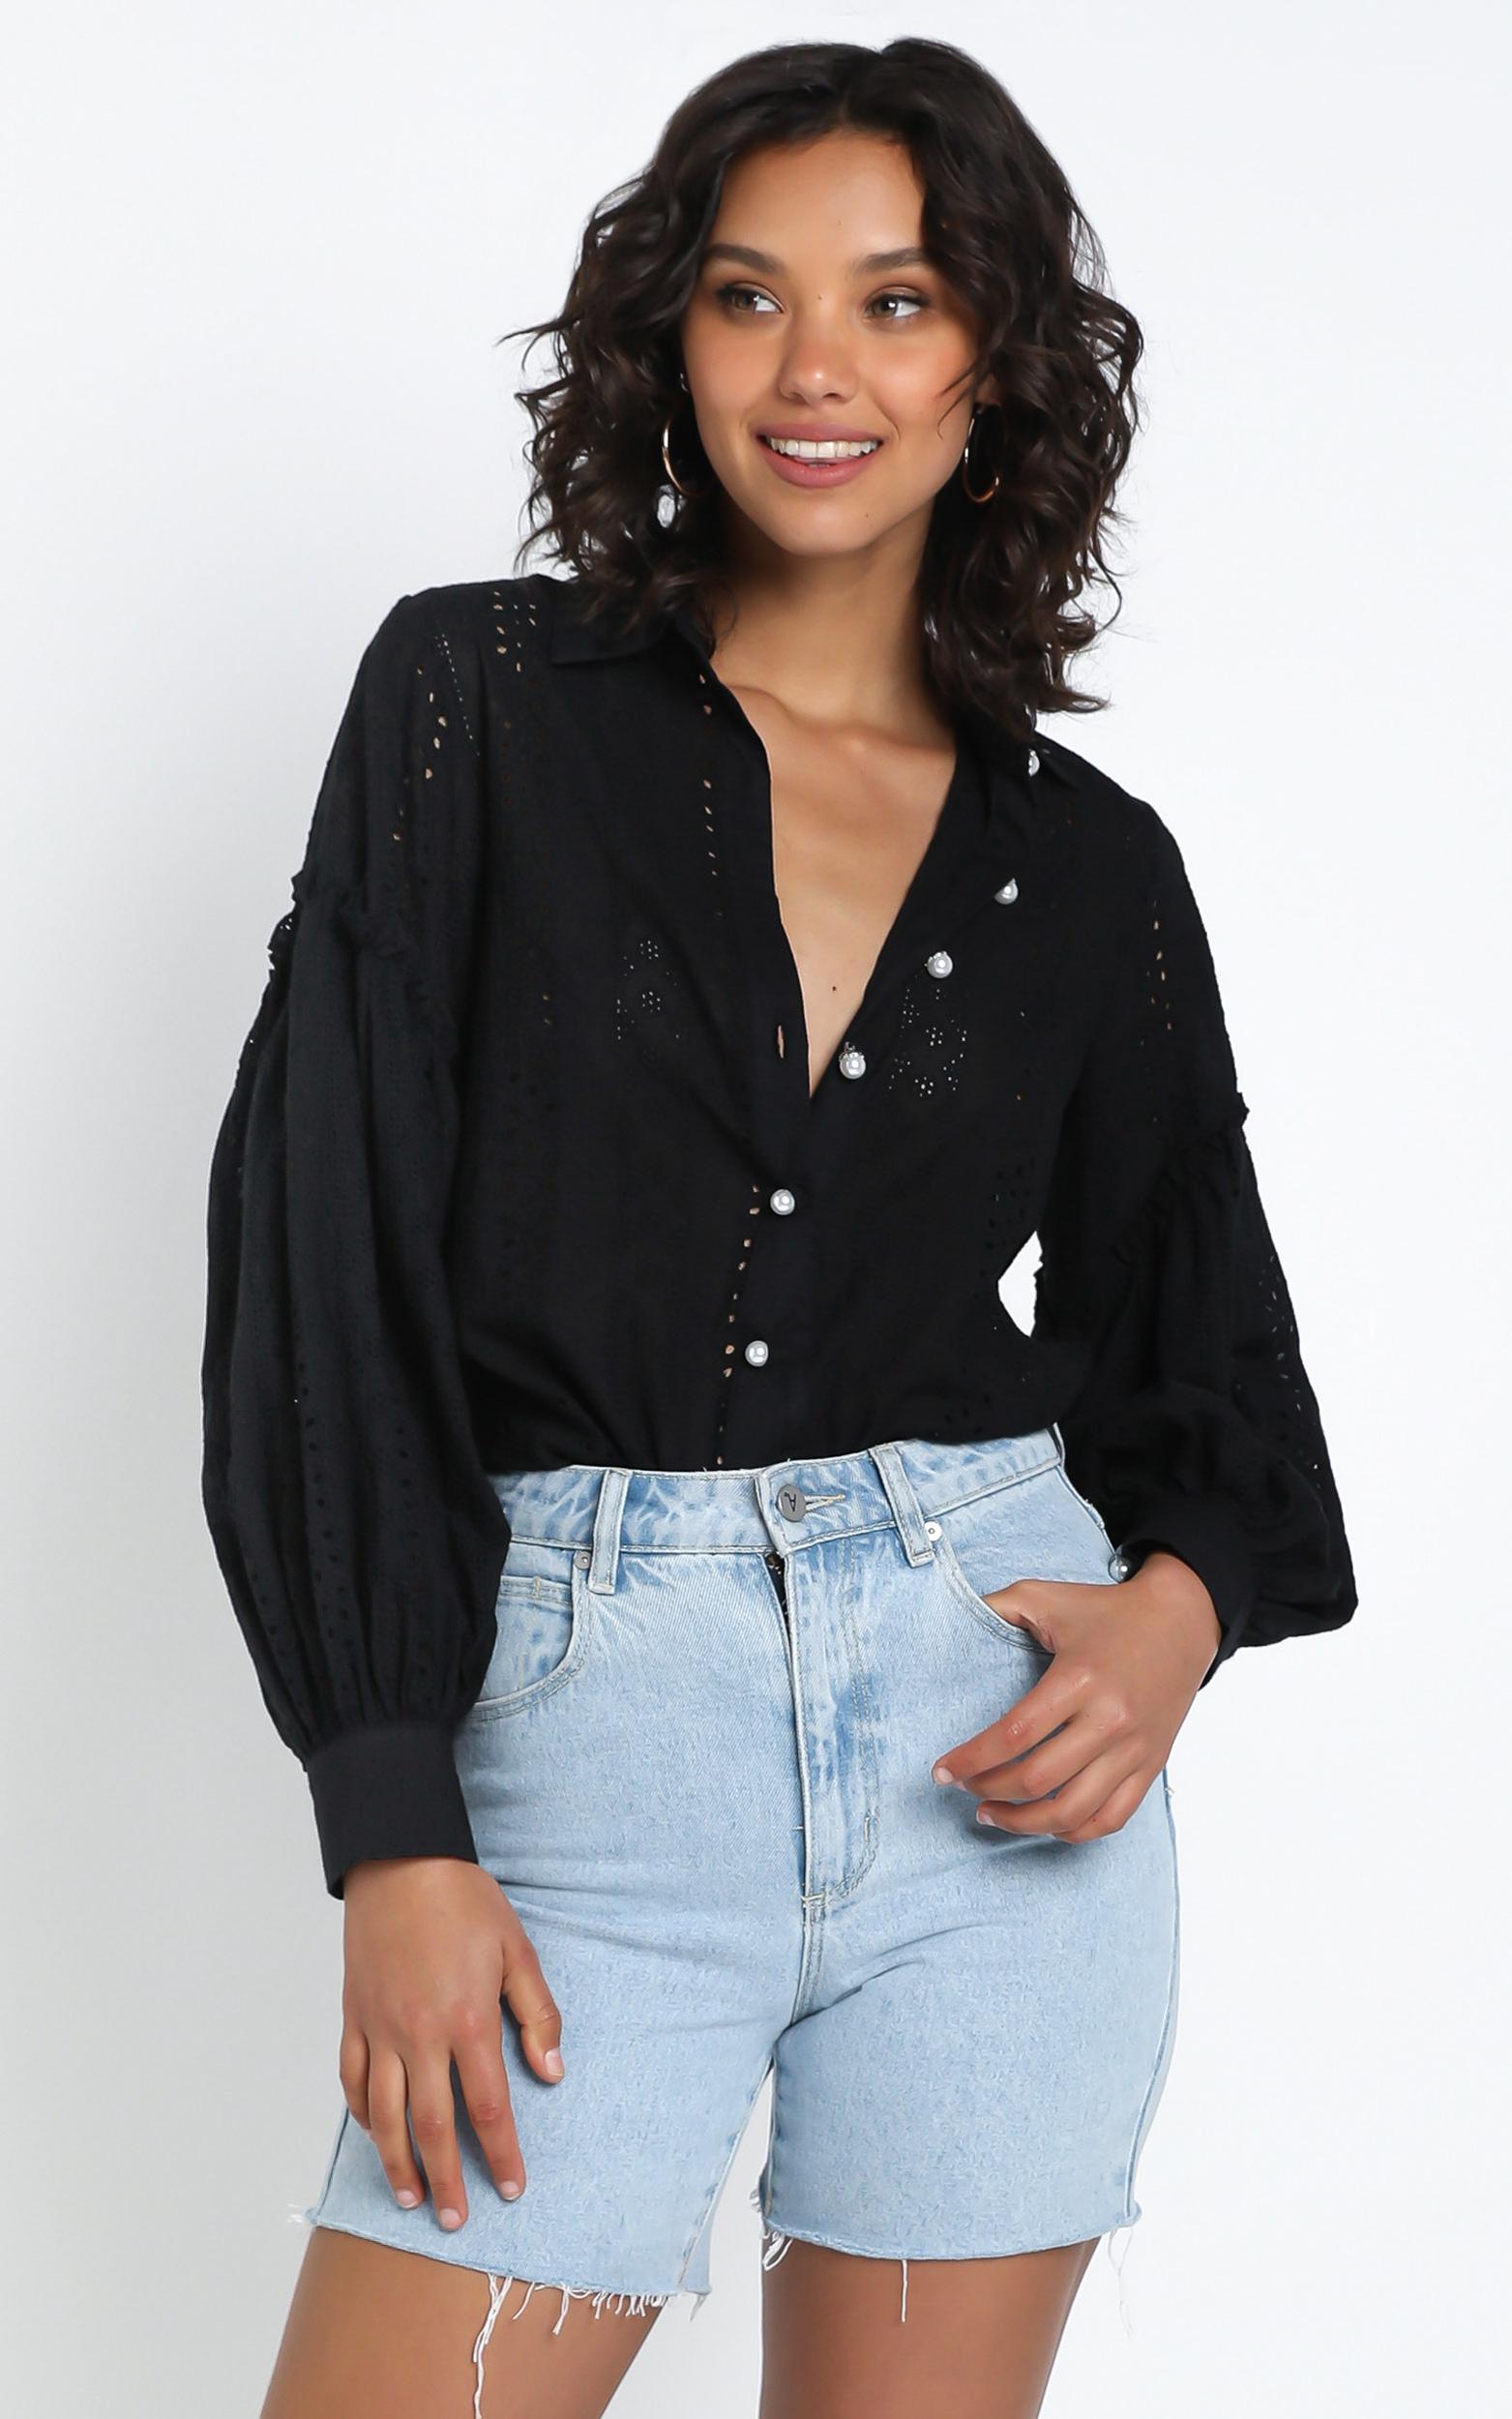 Beautiful Things Embroidery Shirt in Black - 14 (XL), BLK1, hi-res image number null